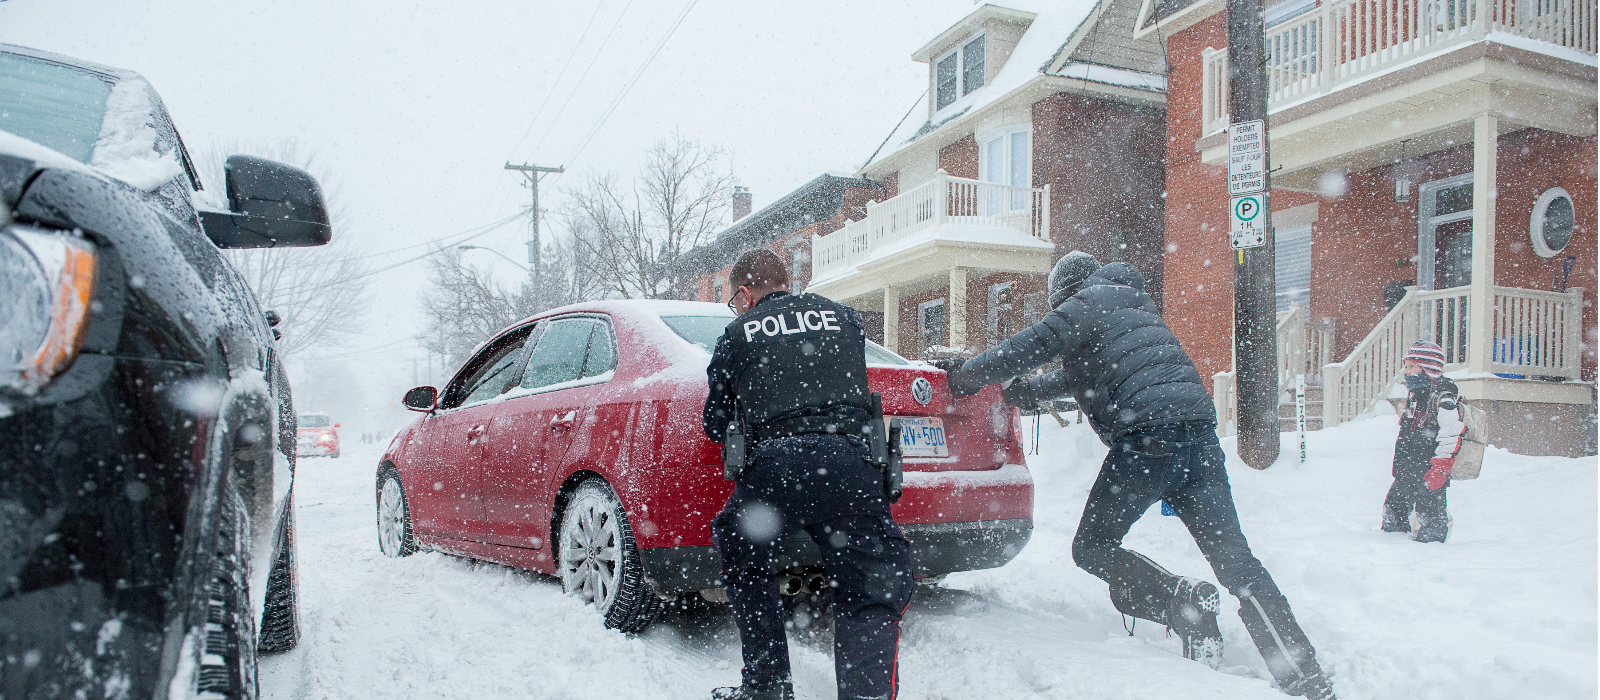 Community Police Officer help a resident out during a winter storm by pushing his stuck car